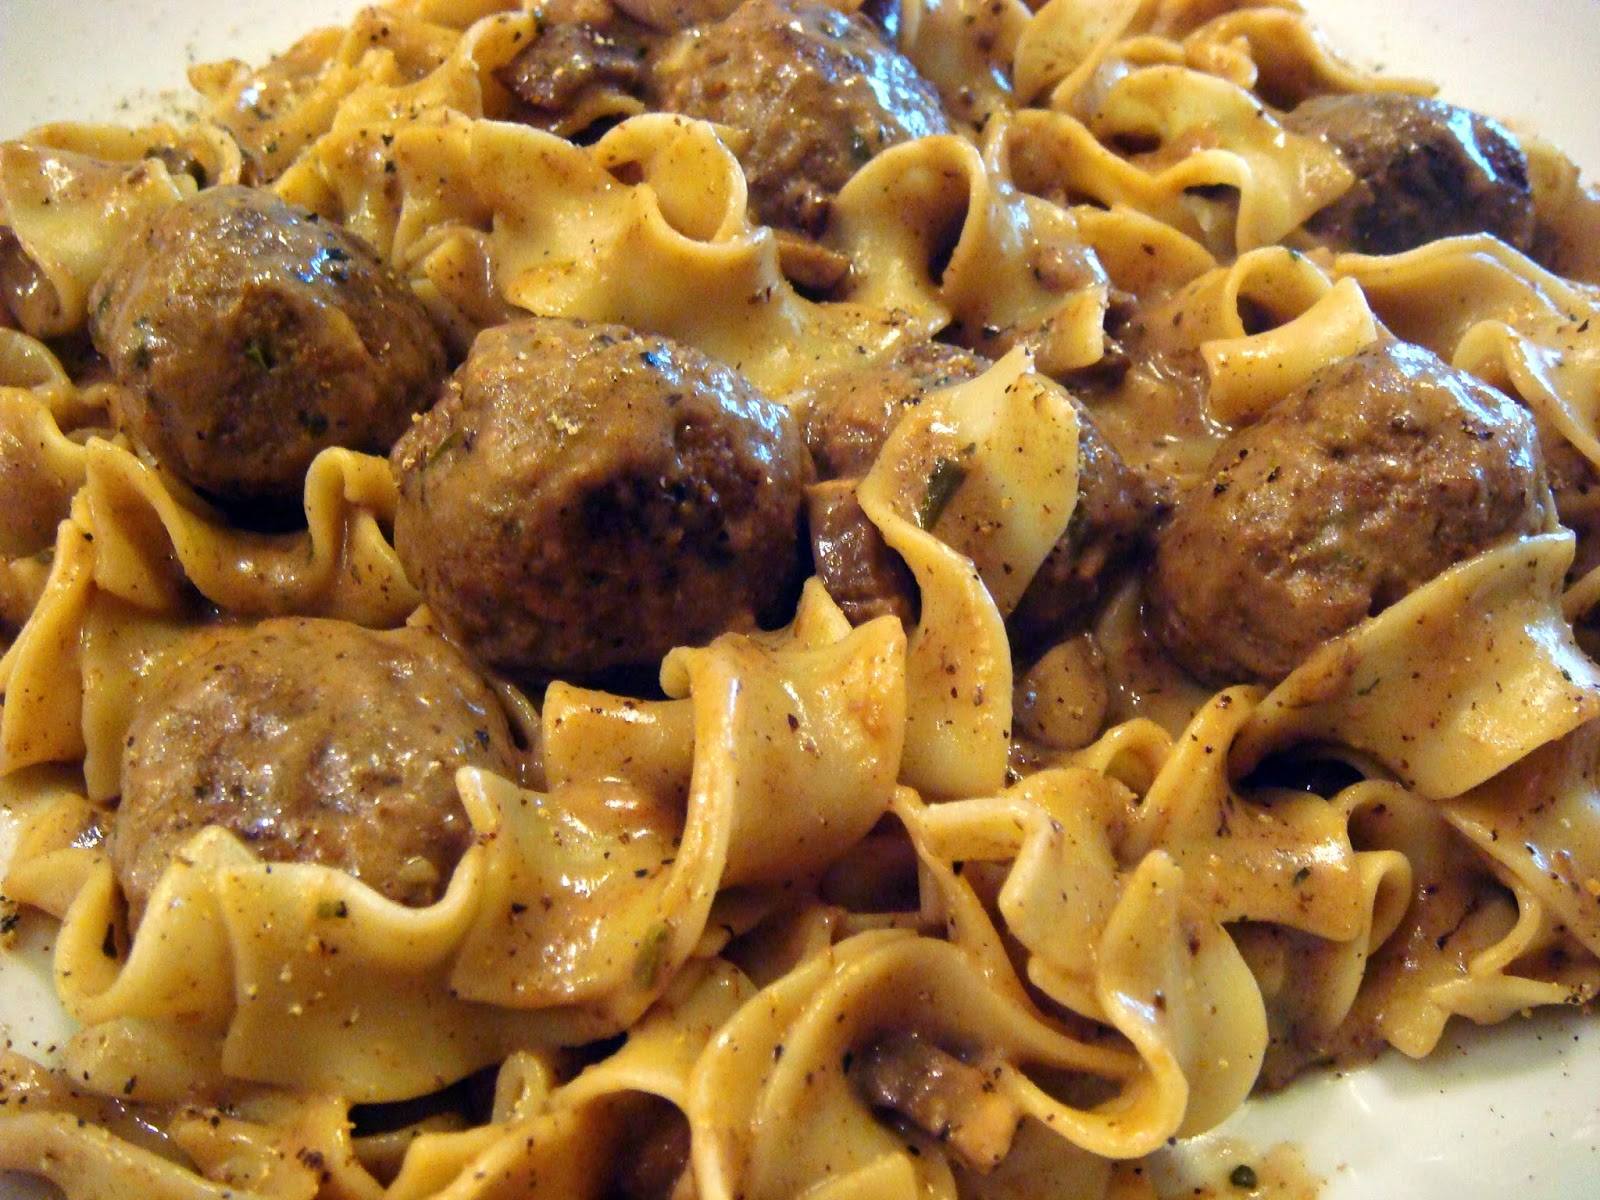 EASY AND SPECIAL SWEDISH MEATBALLS